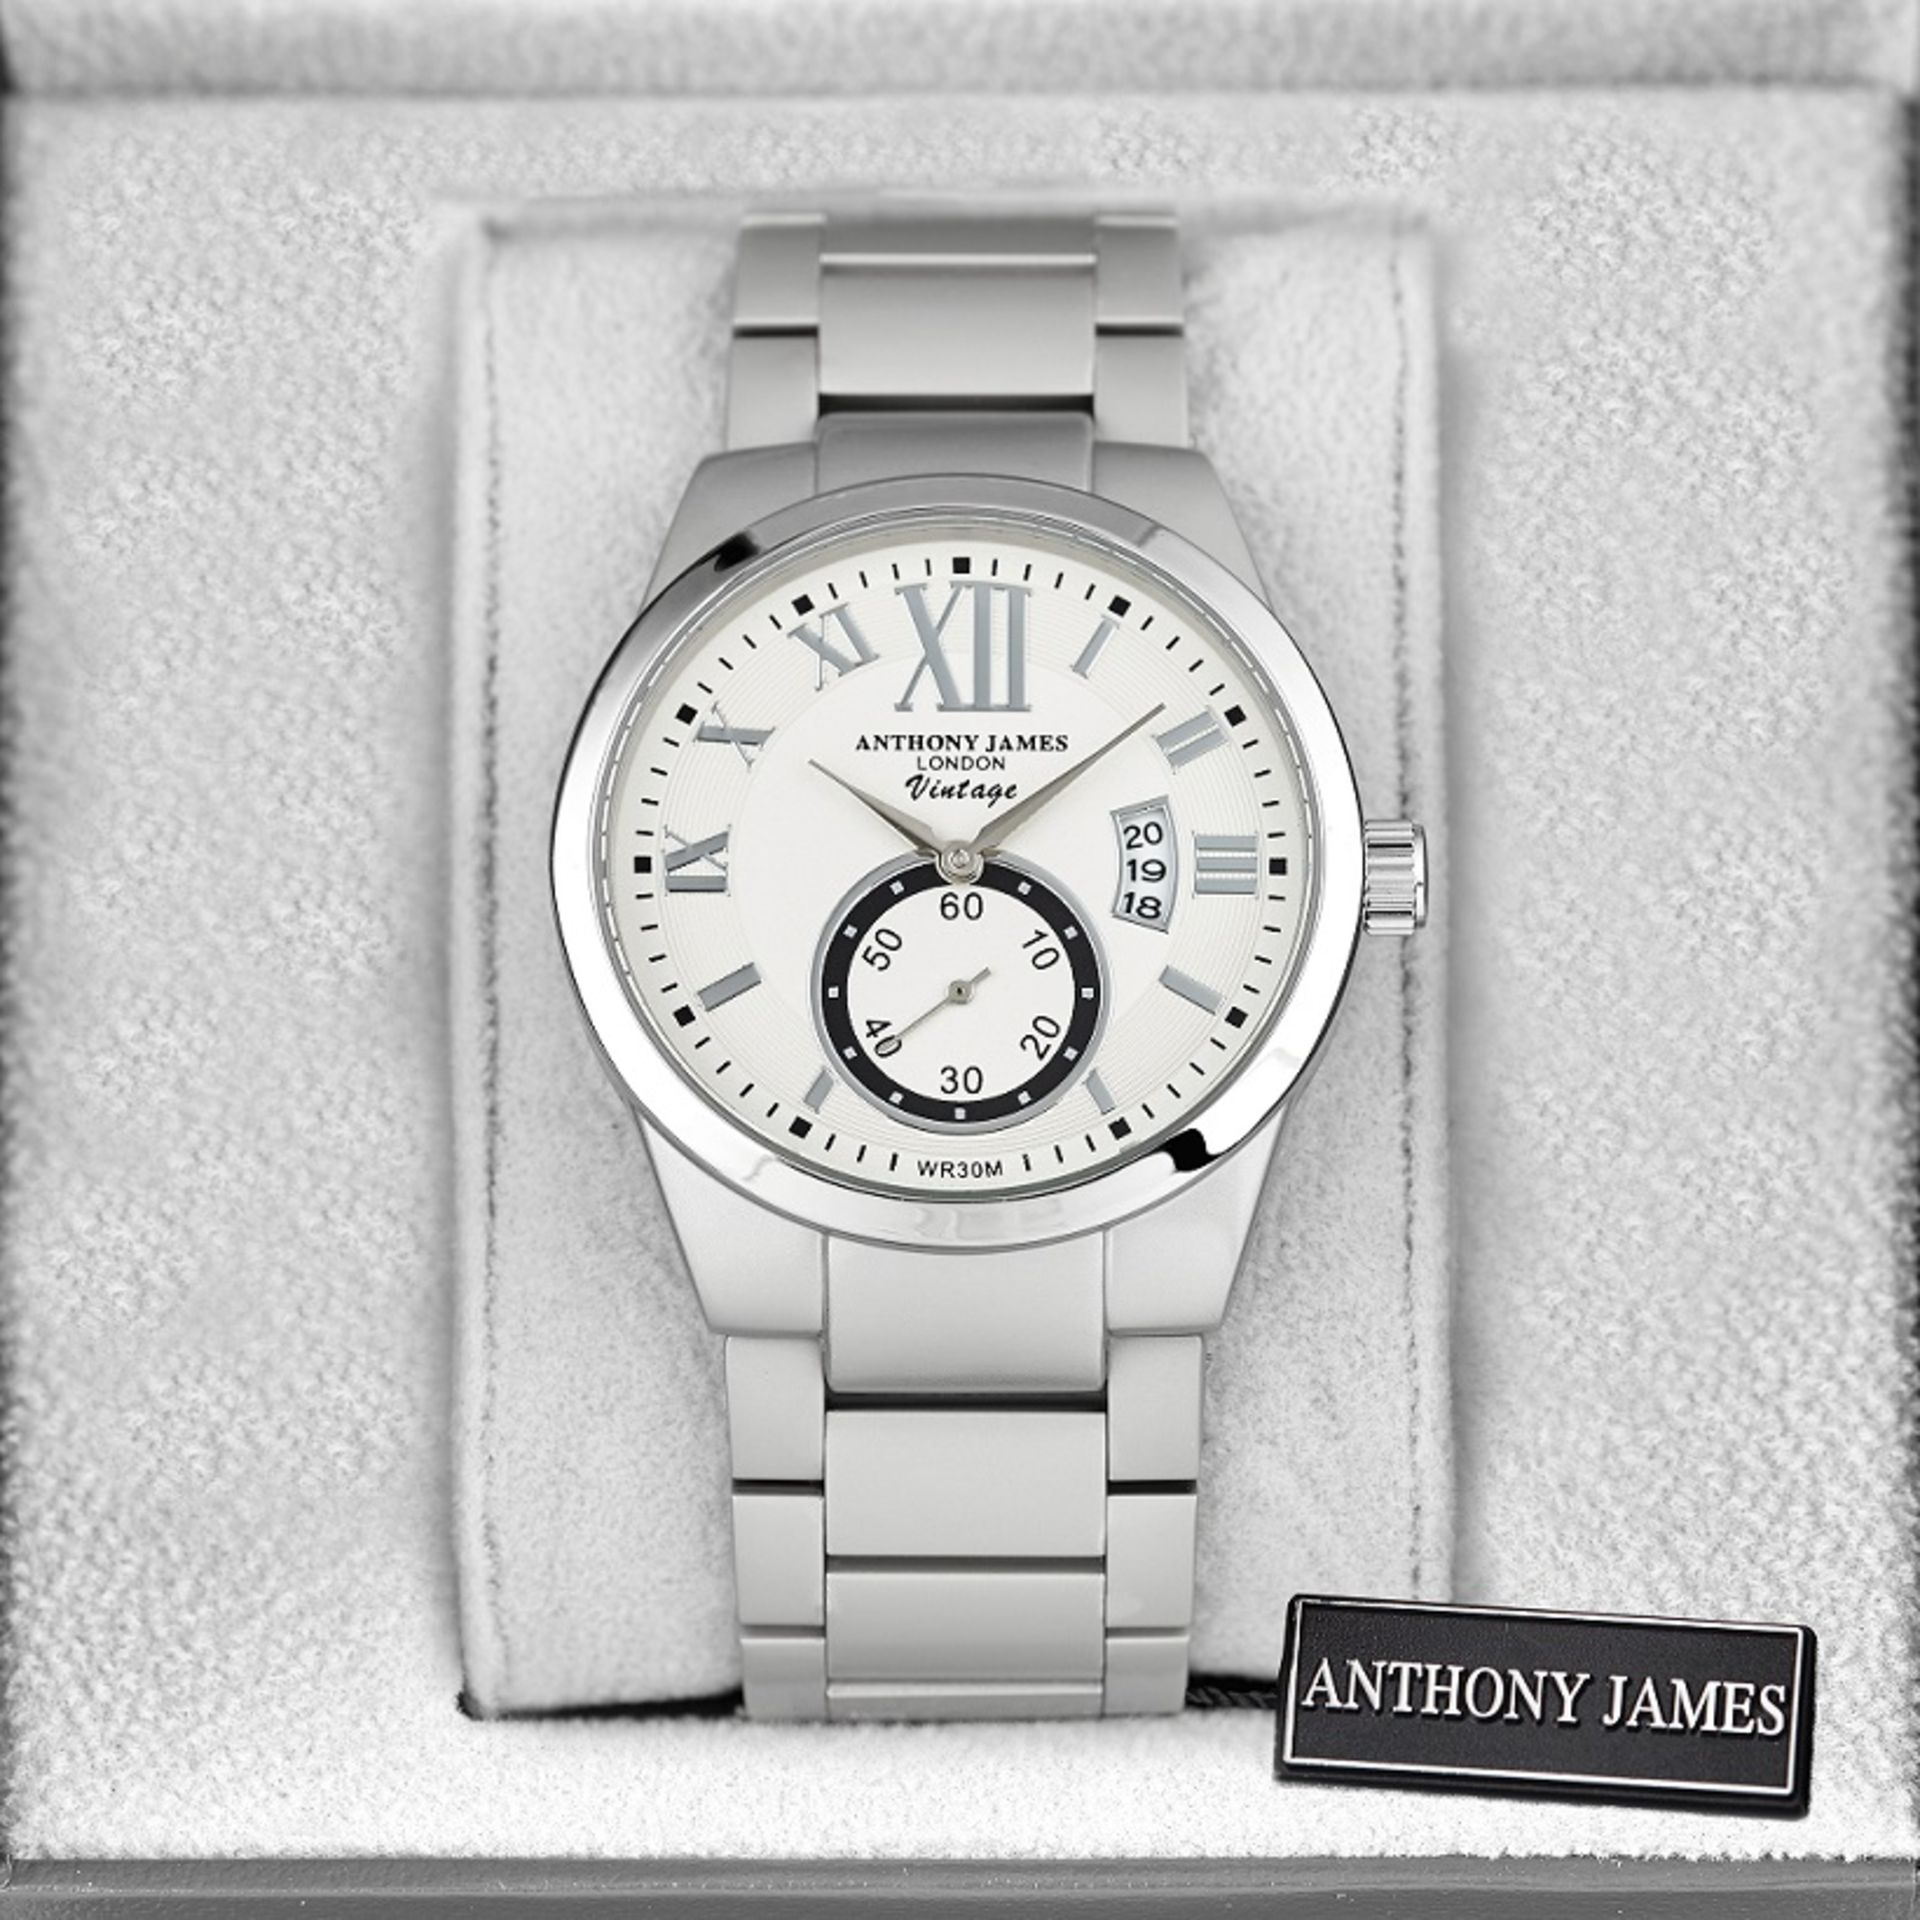 V Brand New Gents Anthony James "Vintage" Stainless Steel Watch With White Face - Date - Separate - Image 2 of 3